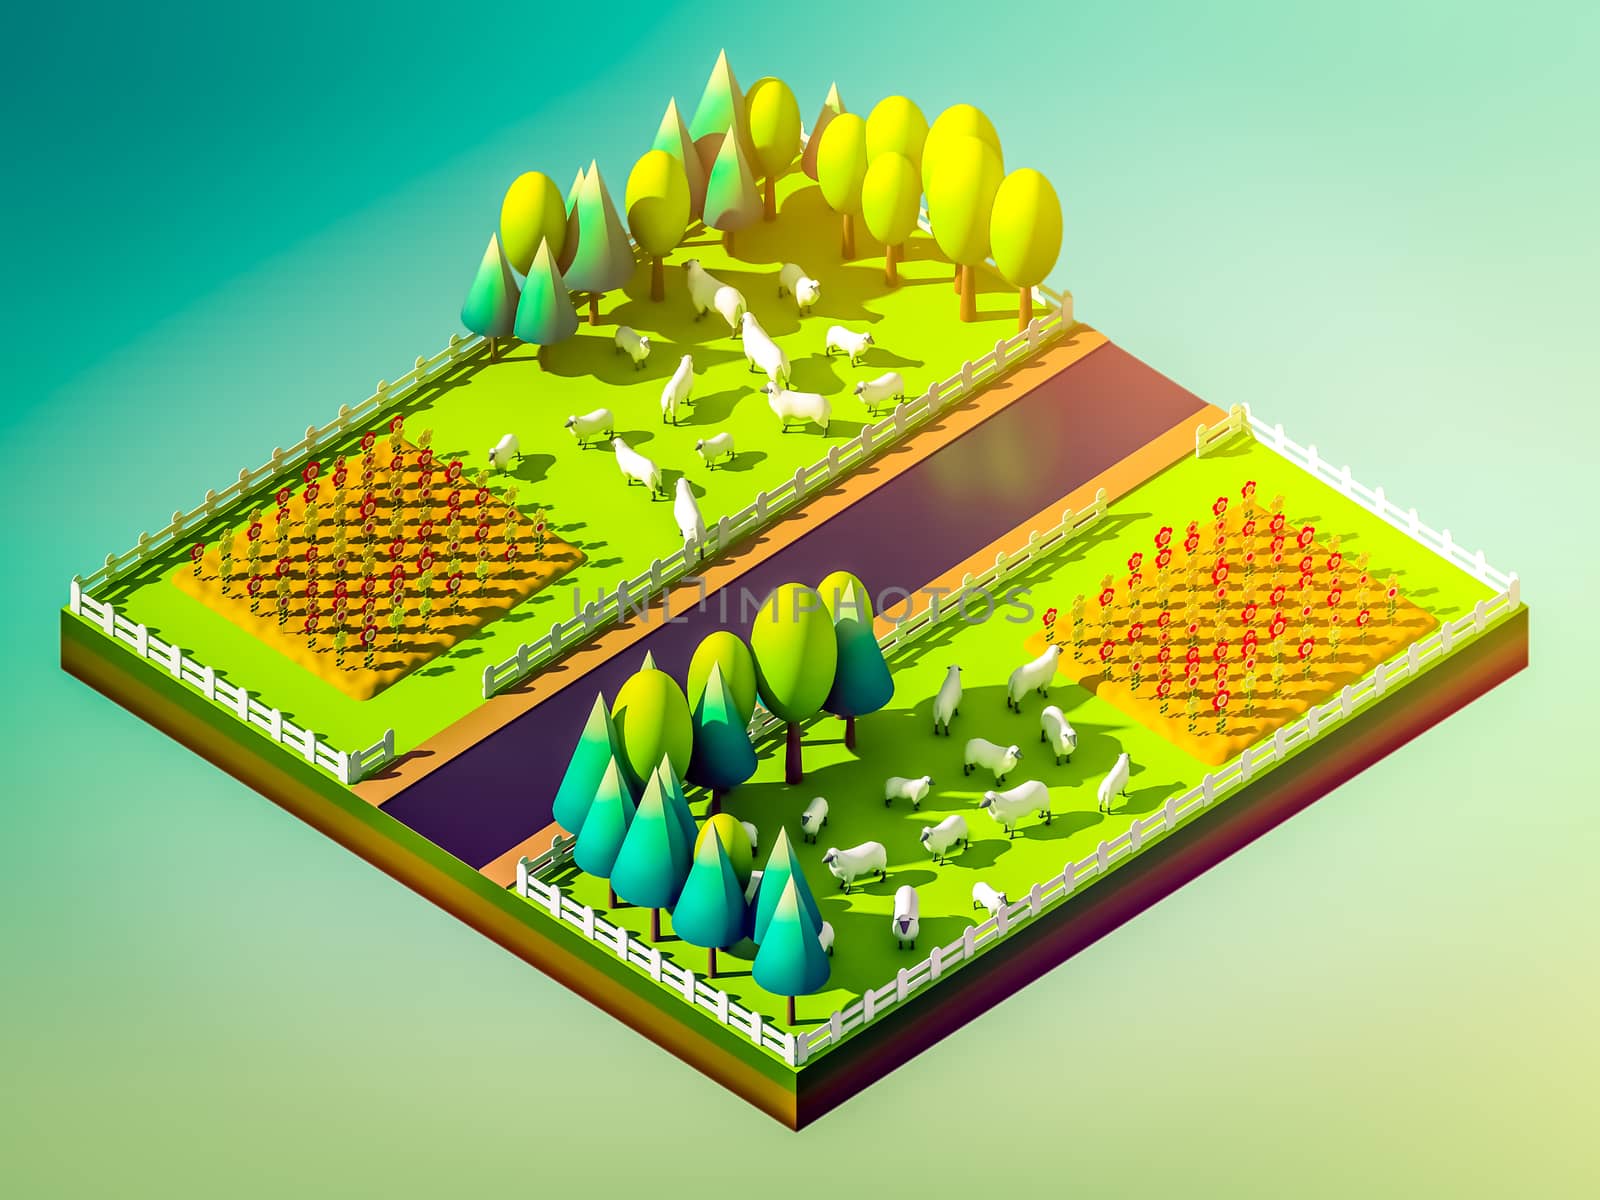 Sheep in the landscape, isometric view by teerawit